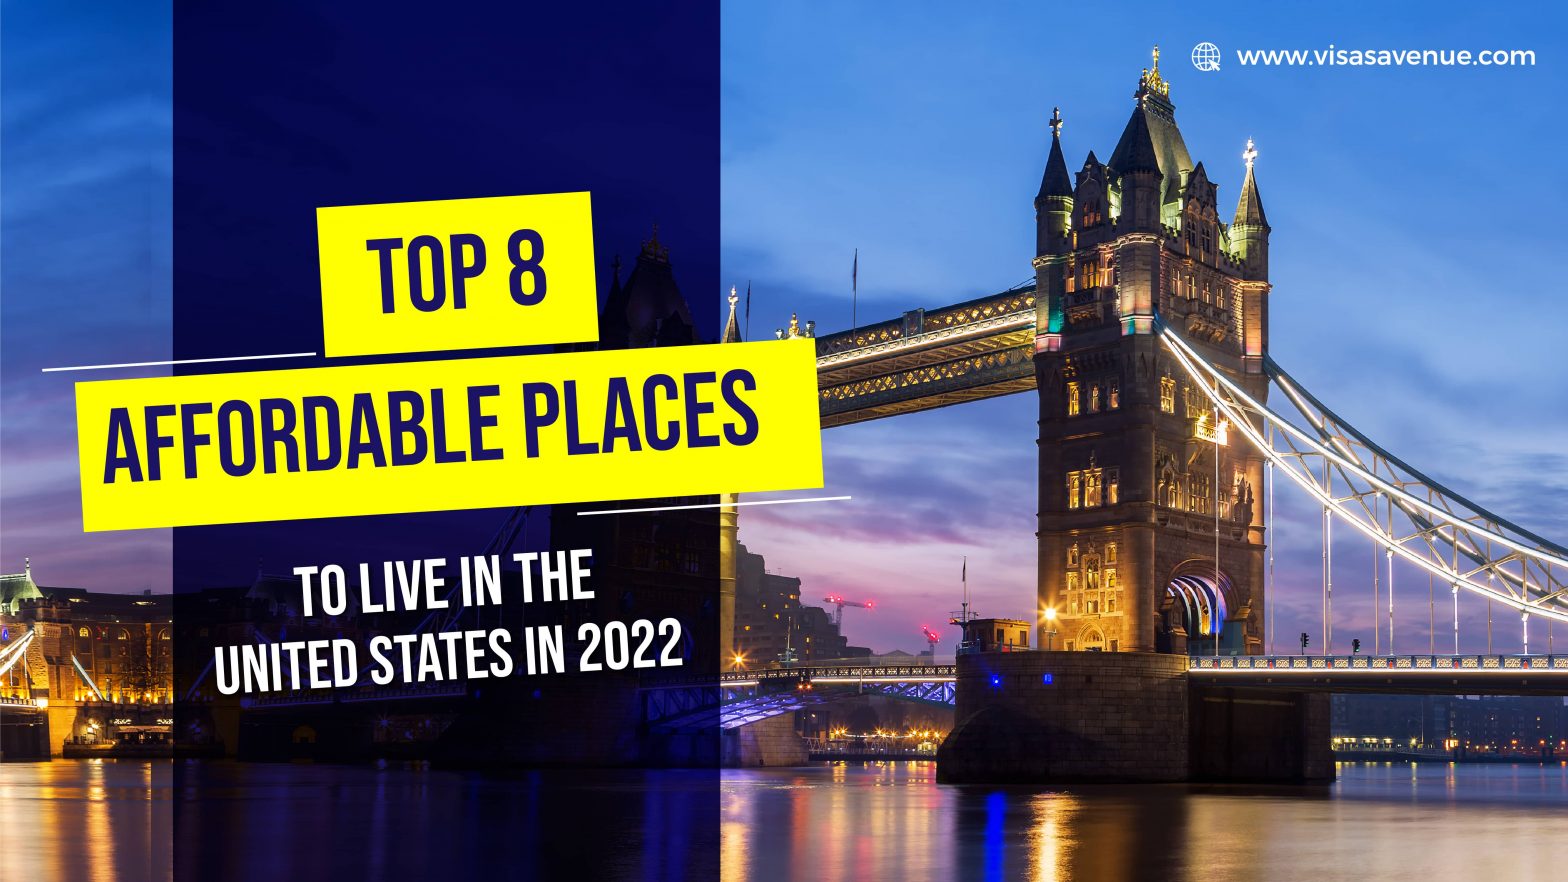 Top 8 Affordable Places to Live in the United States in 2022